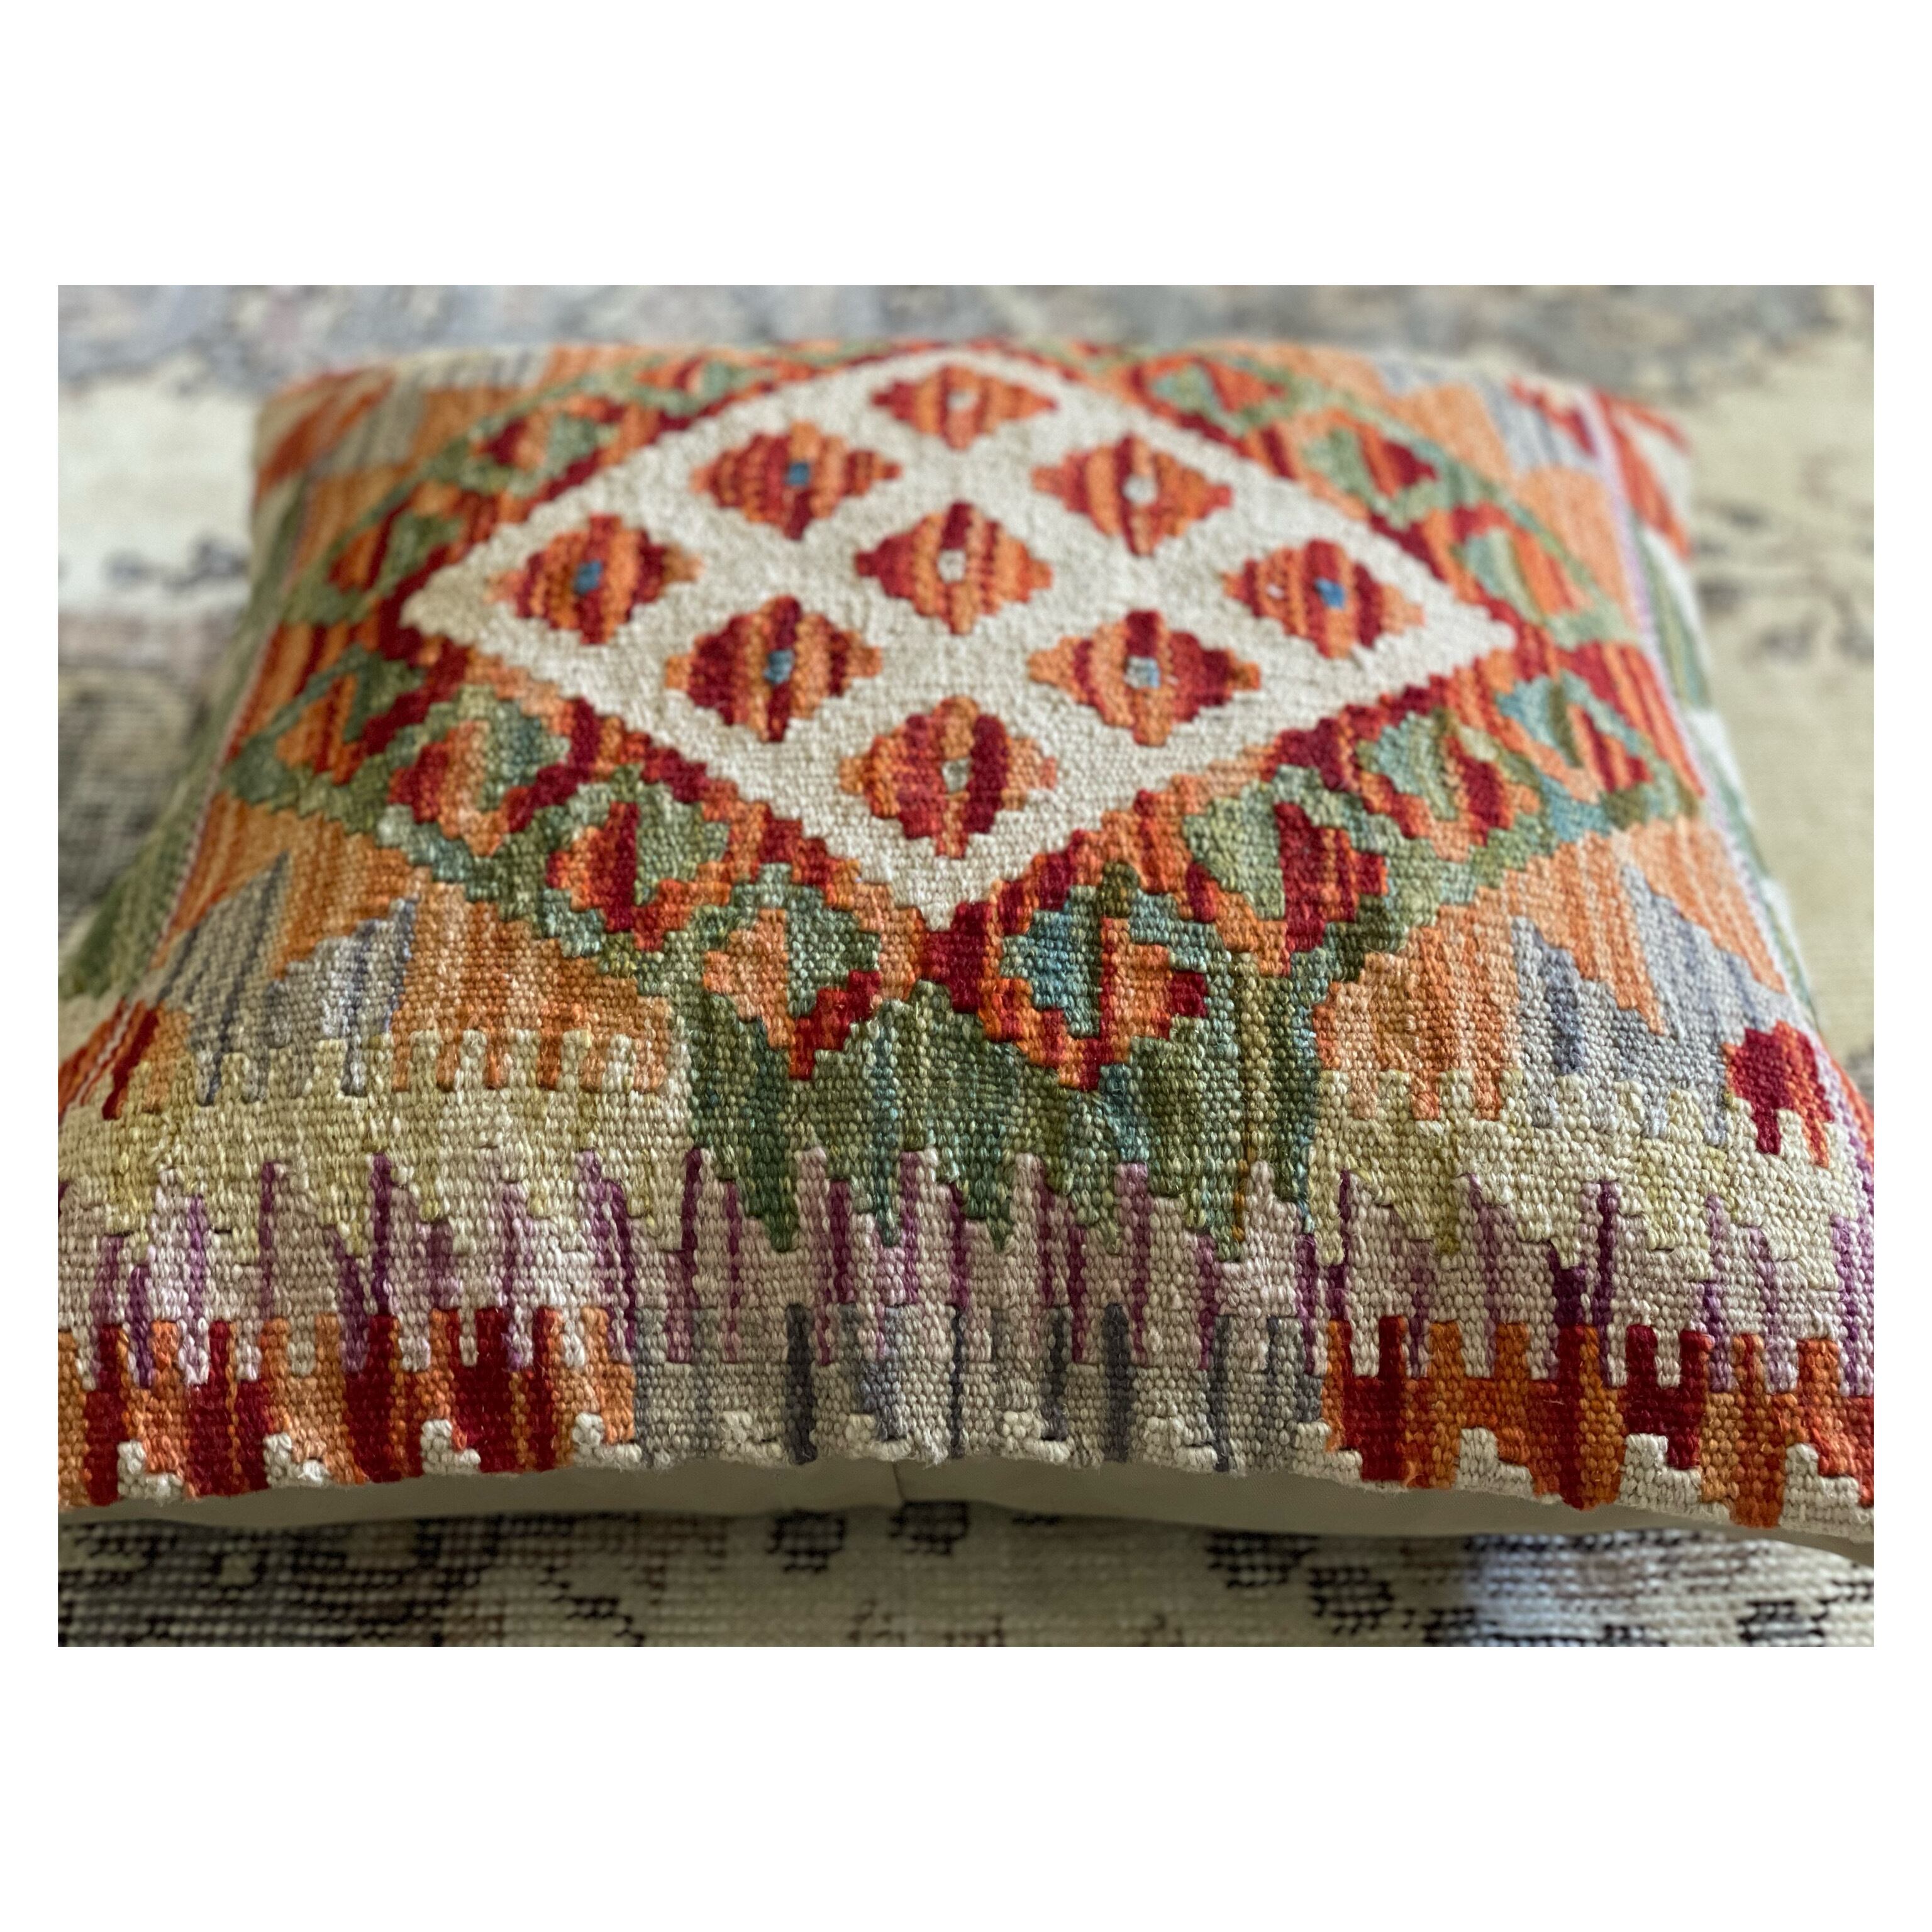 KP0021 45 × 45cm Old kilim pillow cover -center diamonds クッションカバー ピローケース  ピローカバー キリムクッション キリムピロー pillow cover cushion cover